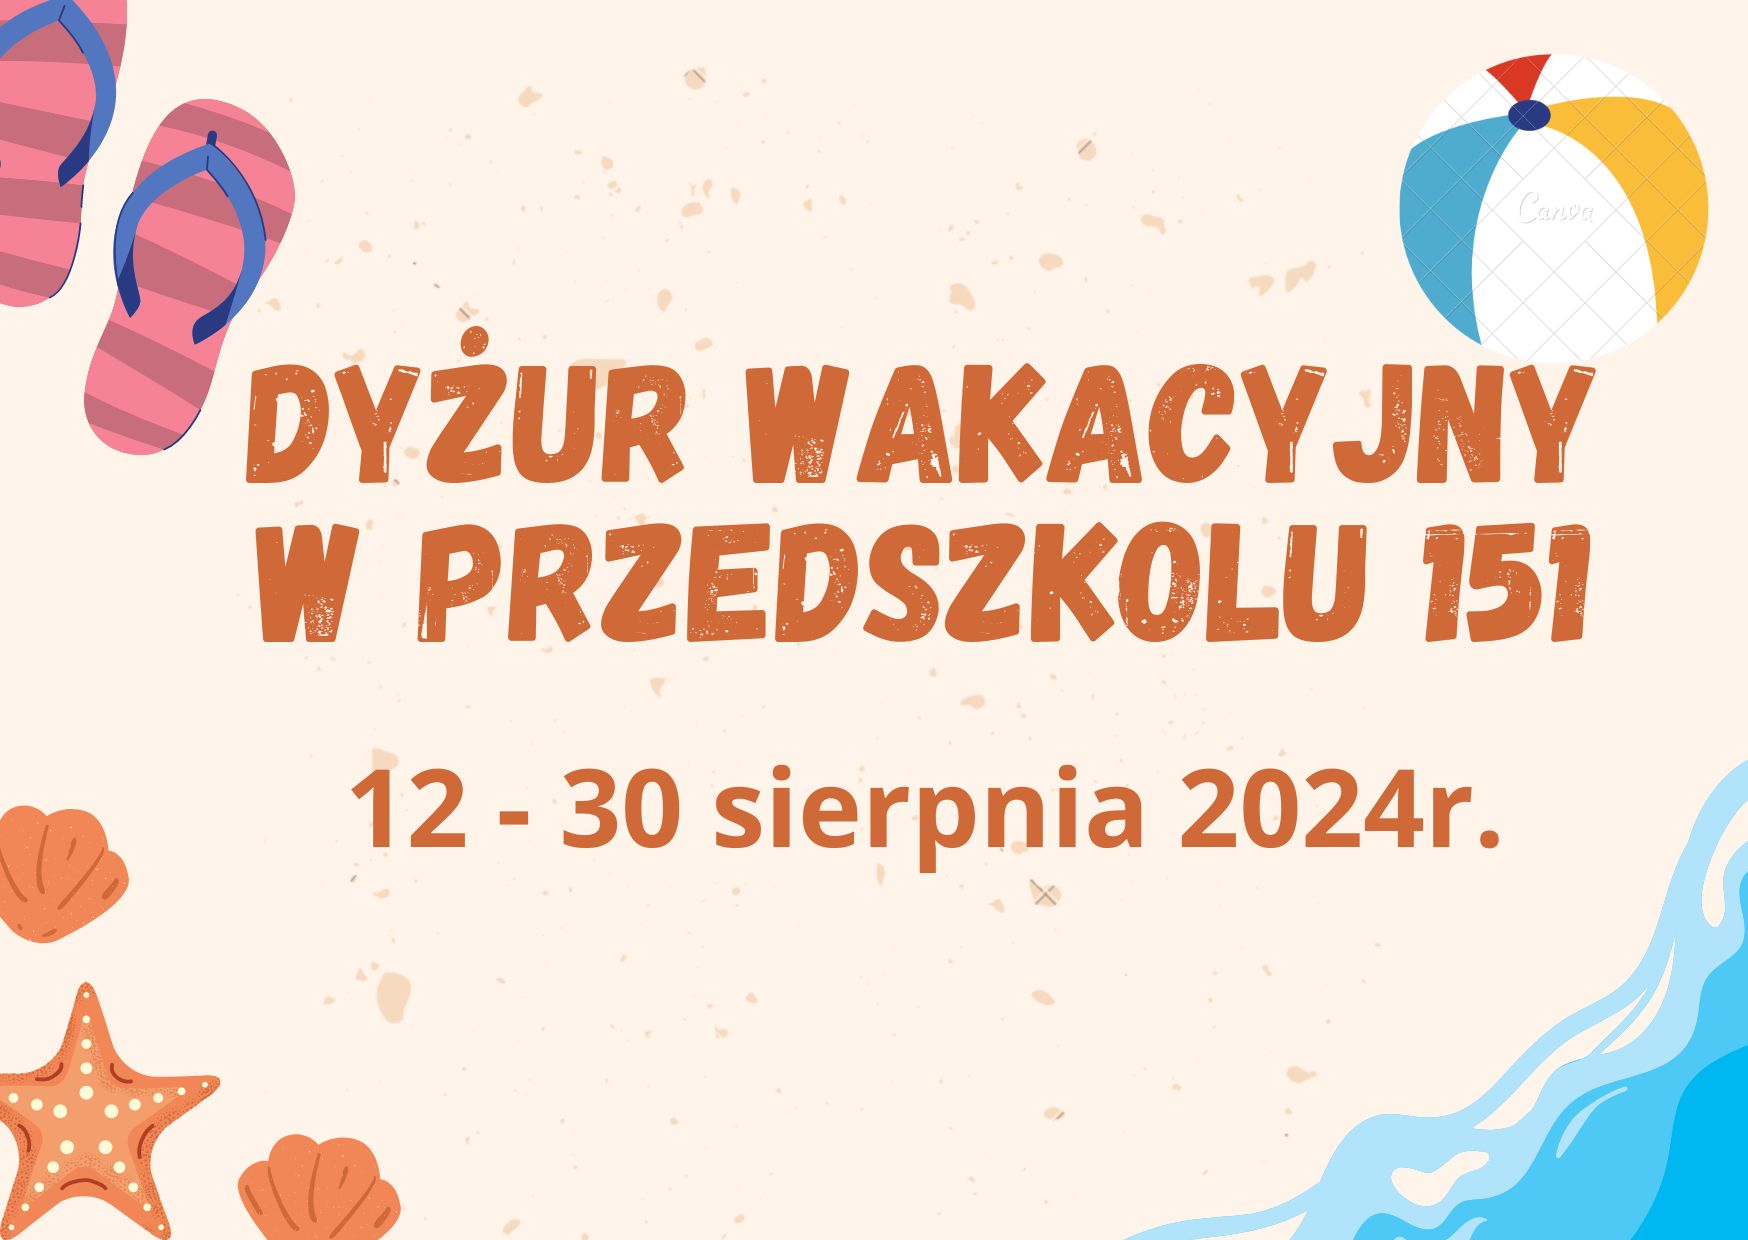 You are currently viewing Dyżur wakacyjny 2024